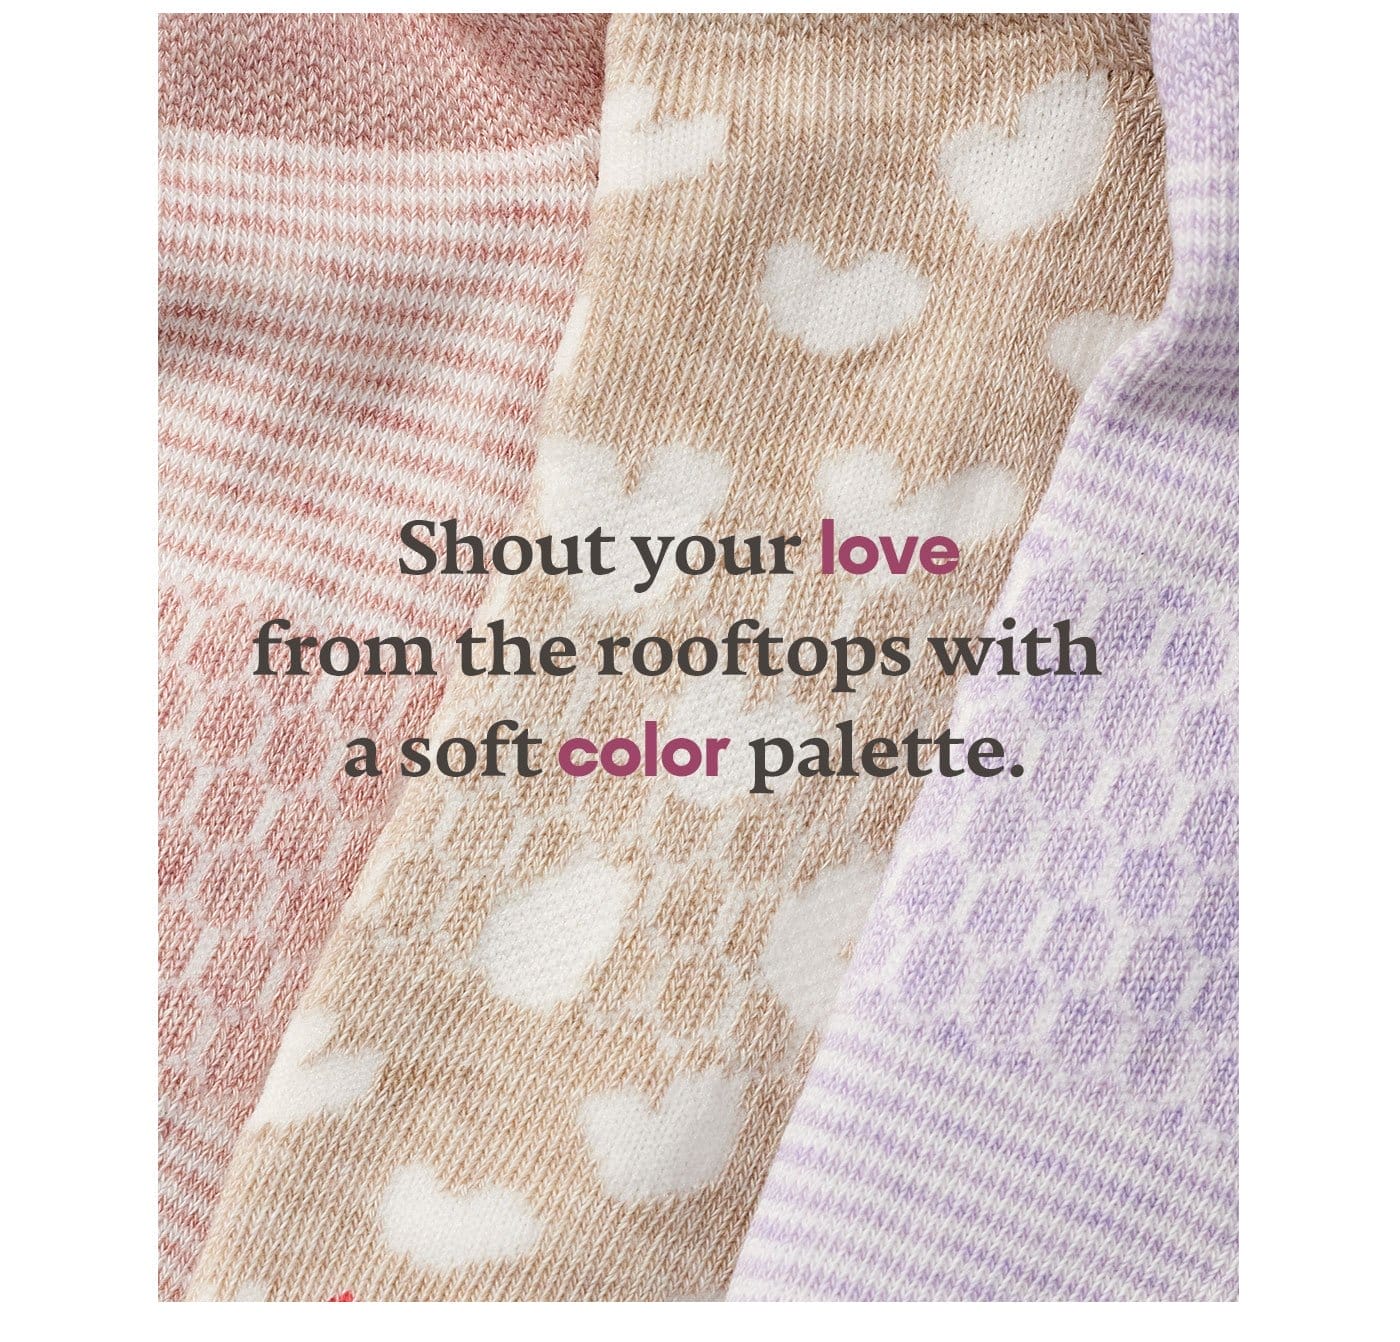 Shout your love from the rooftops with a soft color palette.